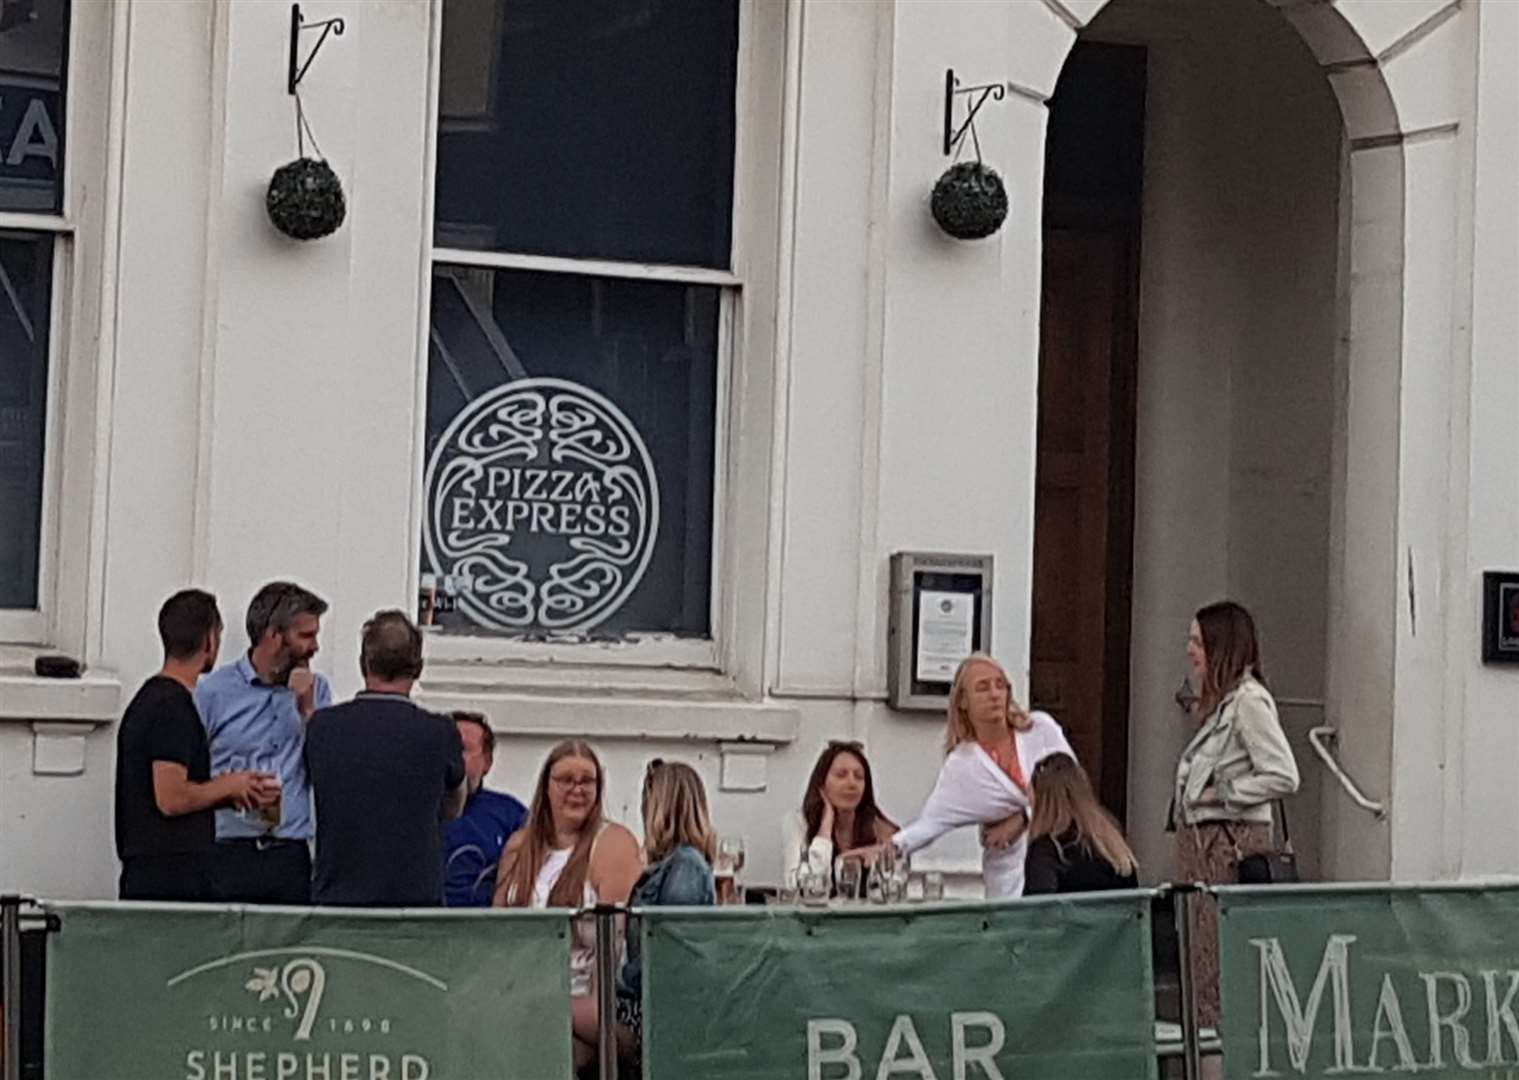 The disused Pizza Express in Earl Street, Maidstone, has now been taken over